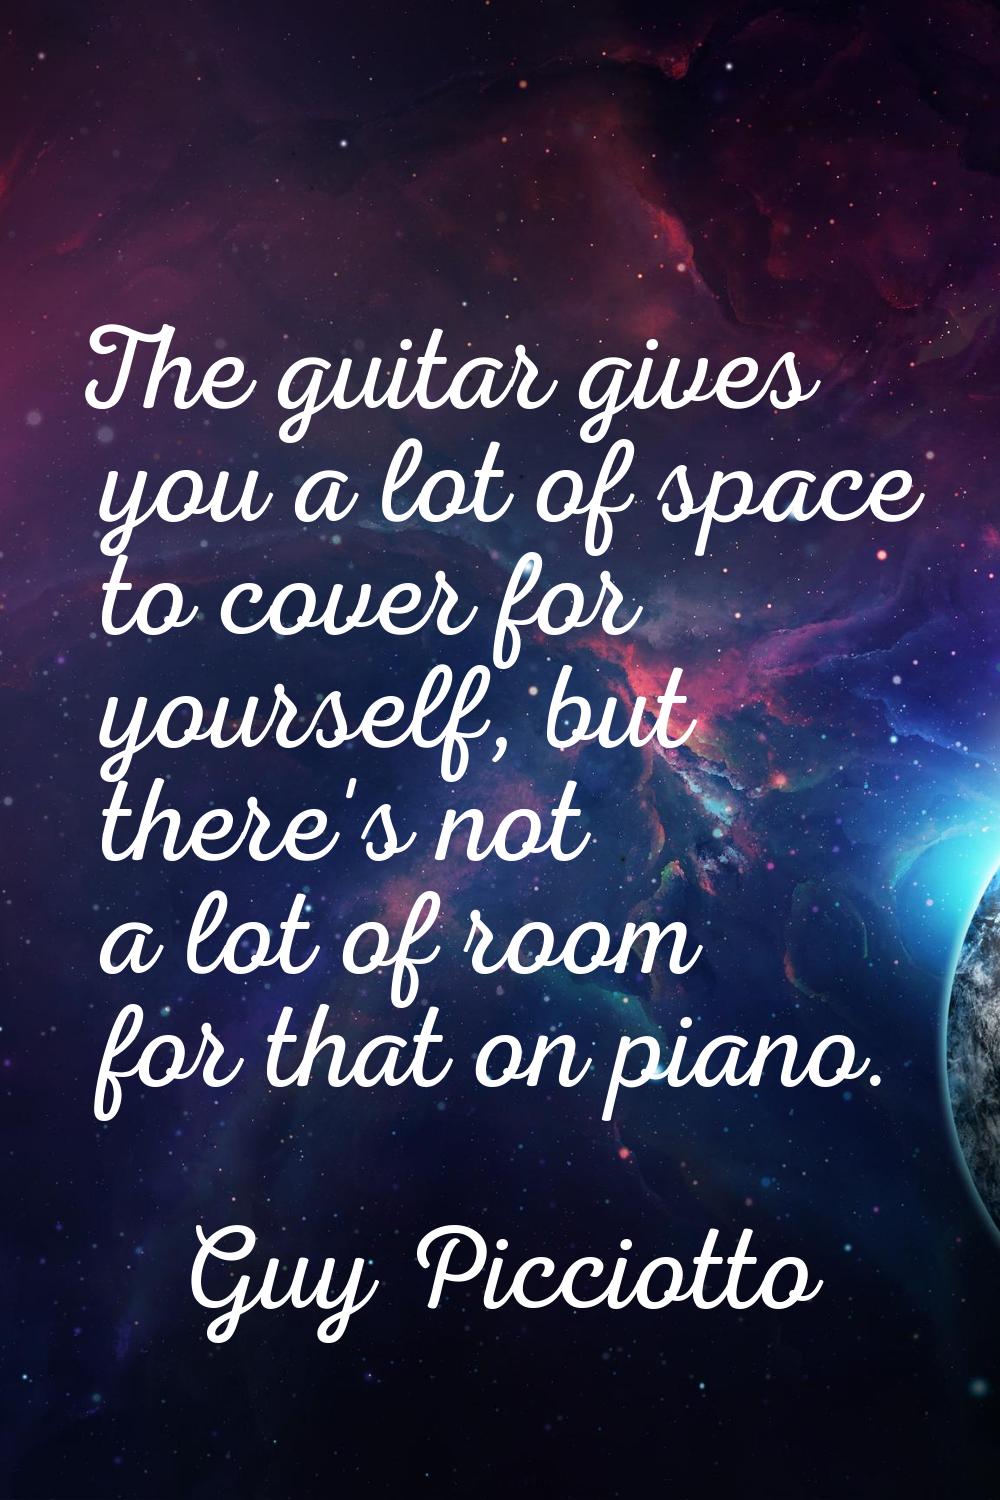 The guitar gives you a lot of space to cover for yourself, but there's not a lot of room for that o